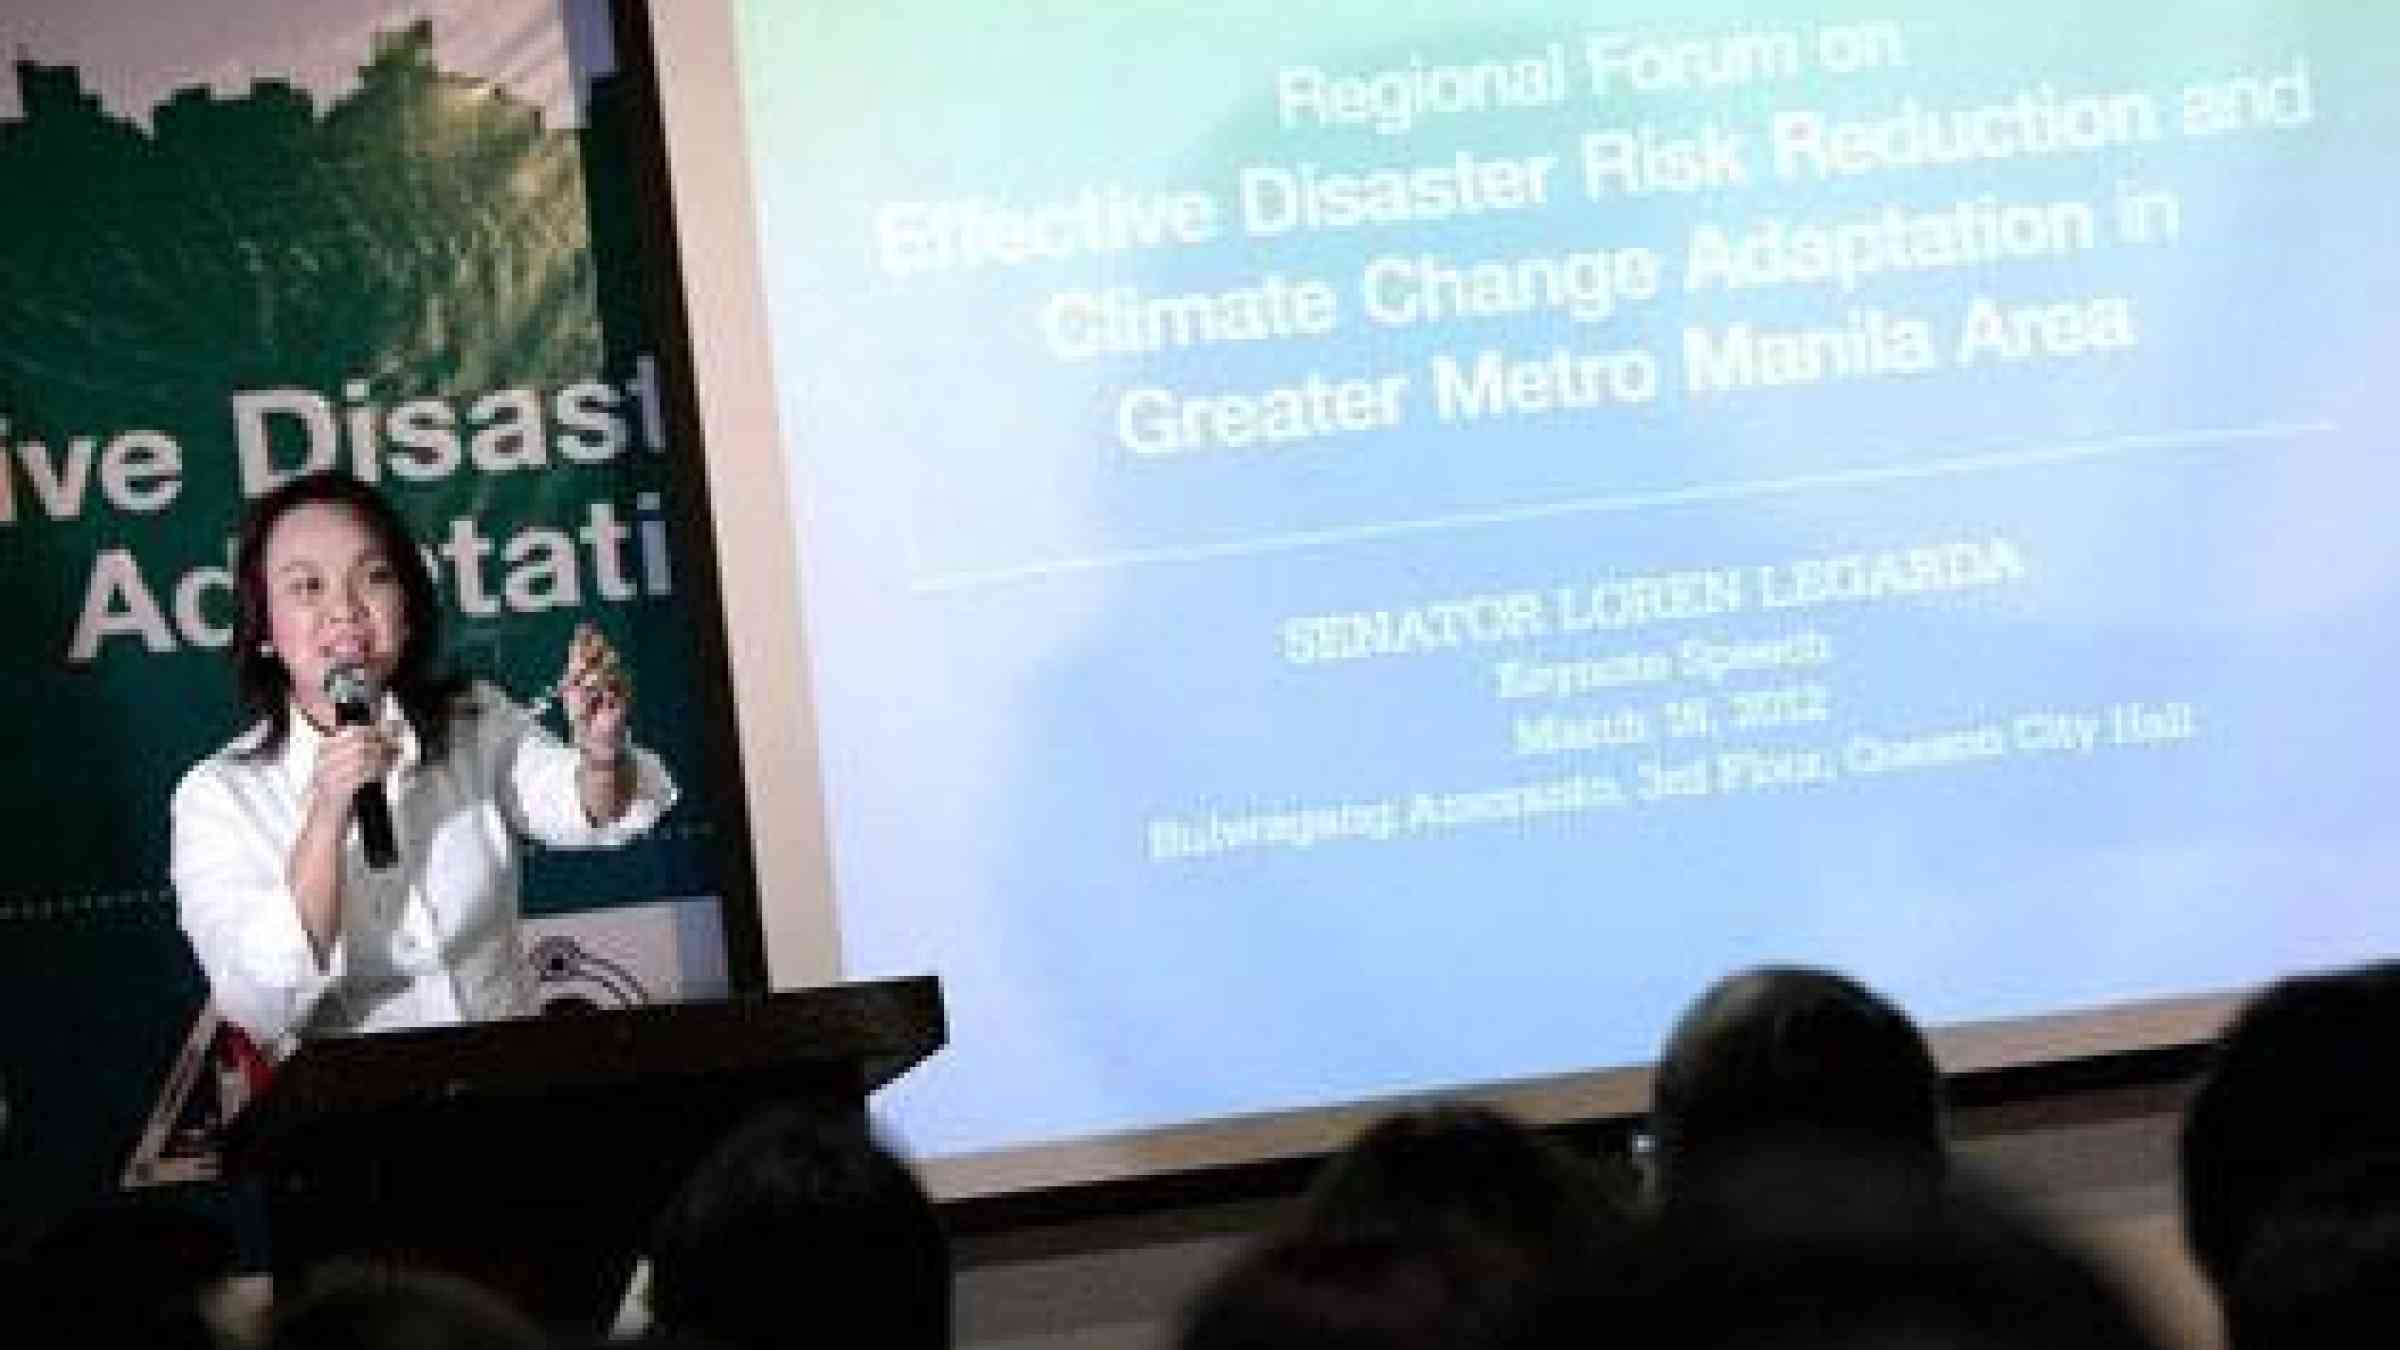 Philippines Senator Loren Legarda gives a keynote speech at the 'Regional Forum on Effective Disaster Risk Reduction and Climate Change Adaptation in Greater Metro Manila' in March 2012. (Photo/Joseph Vidal)